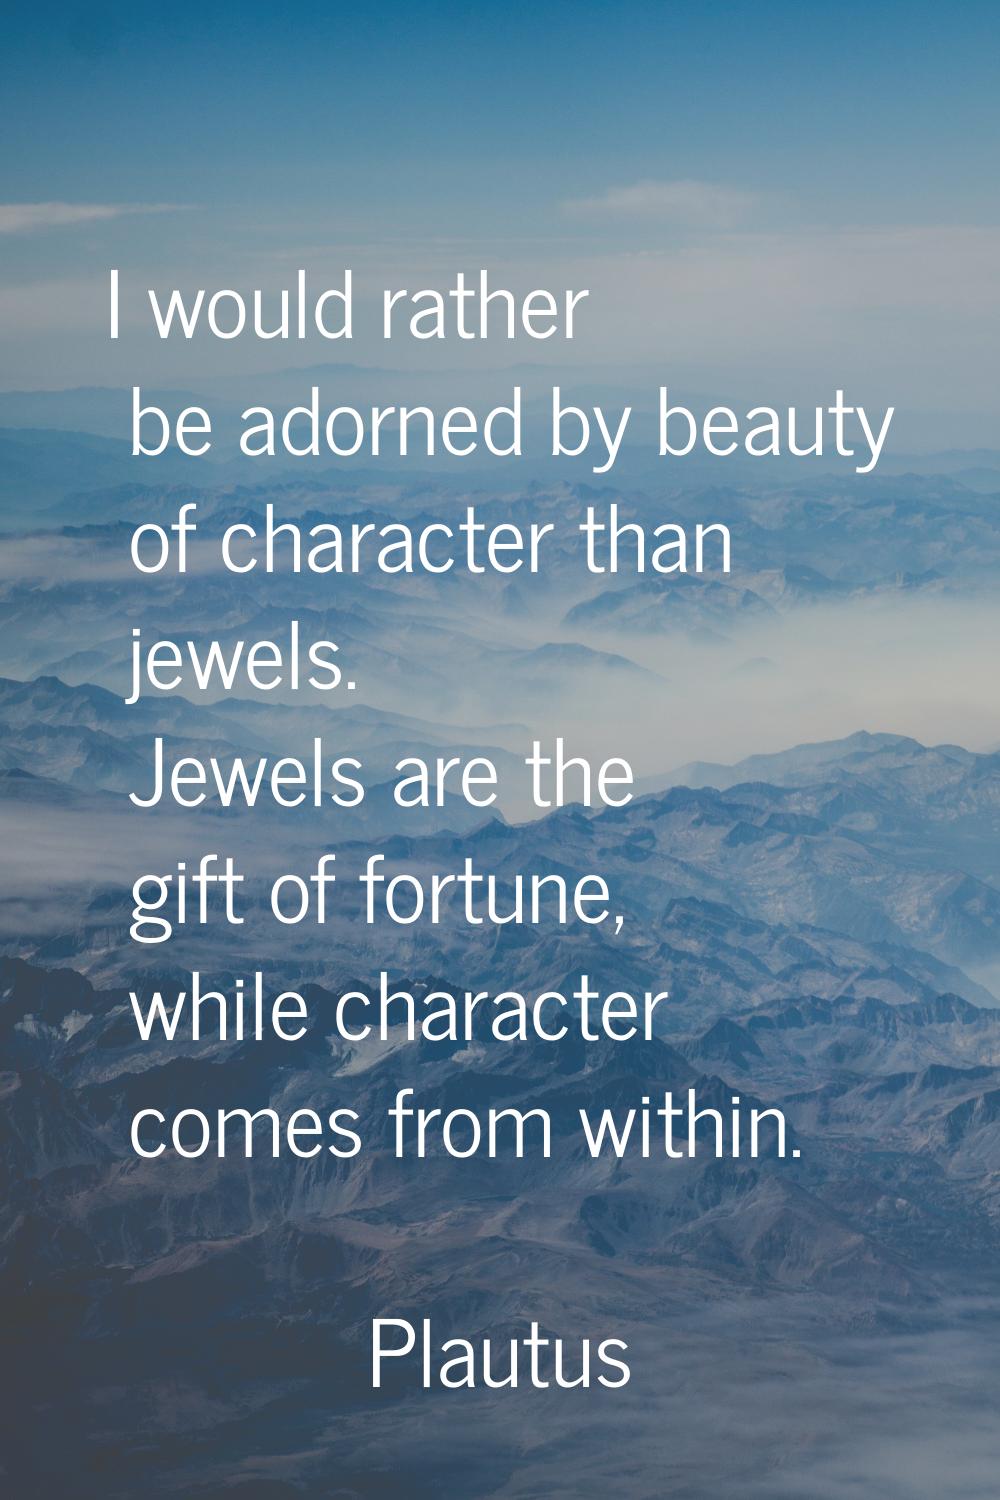 I would rather be adorned by beauty of character than jewels. Jewels are the gift of fortune, while